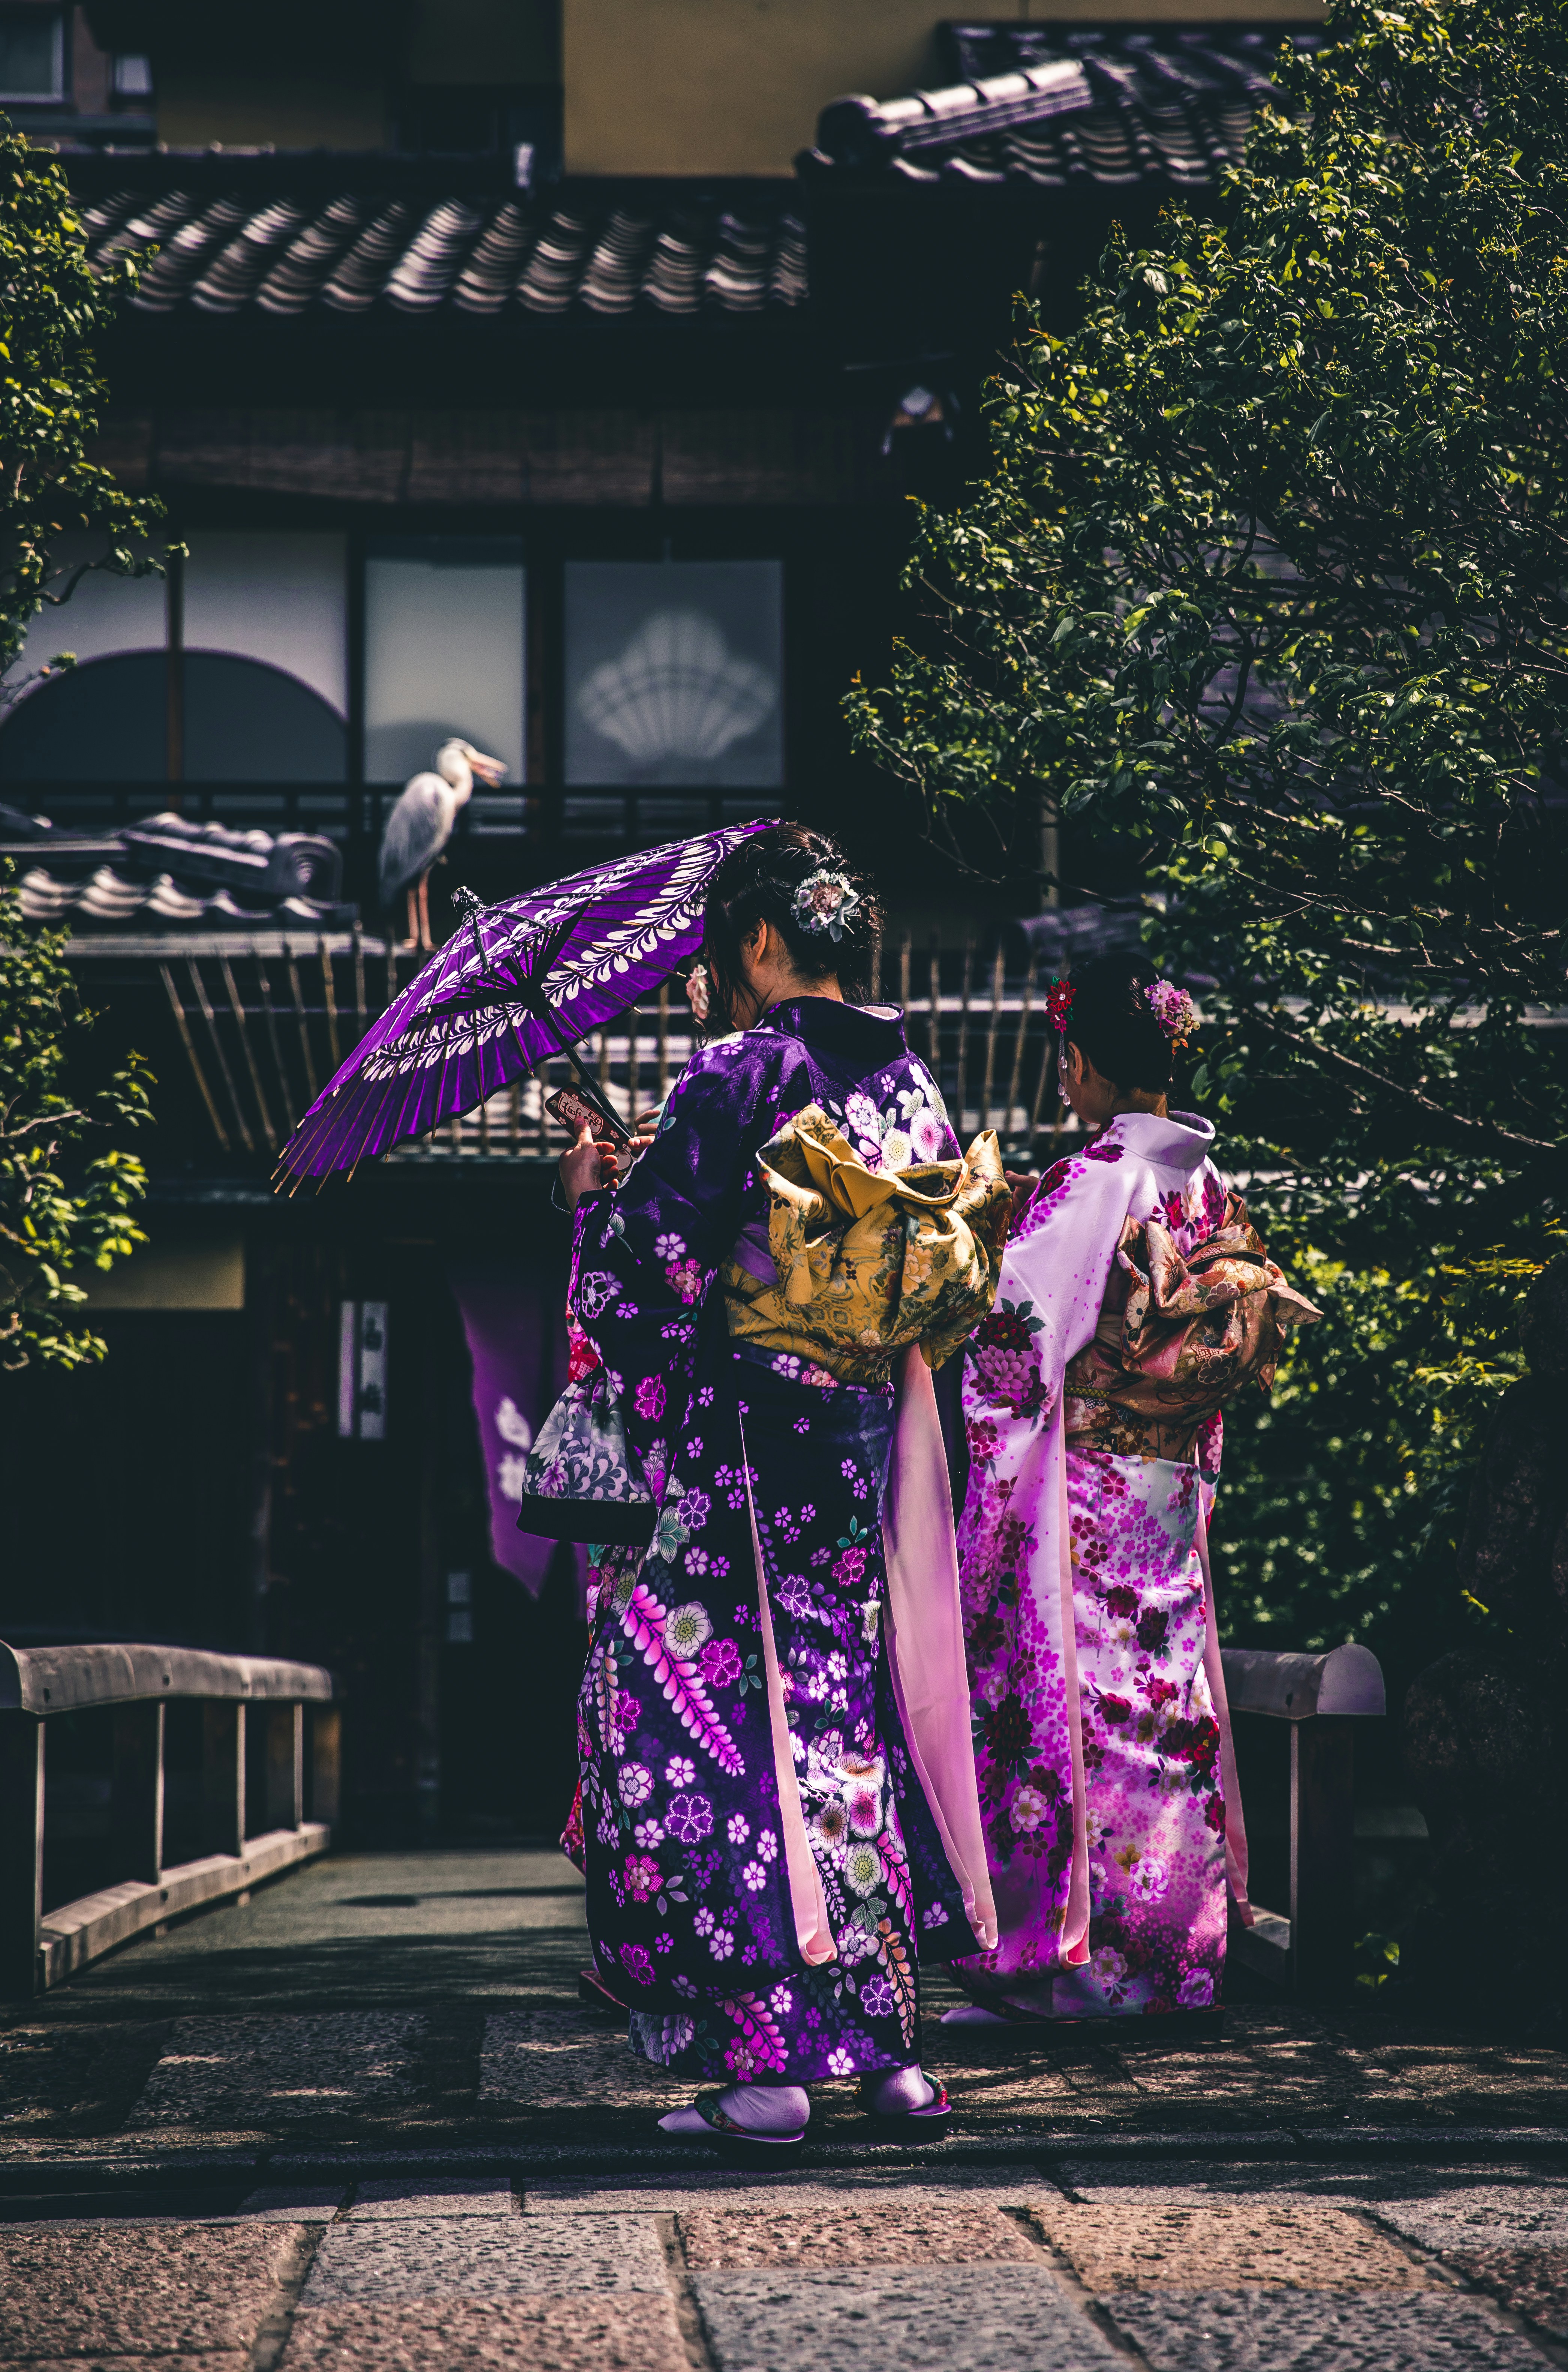 Gender Gap Marriage and Birthrate in Japan